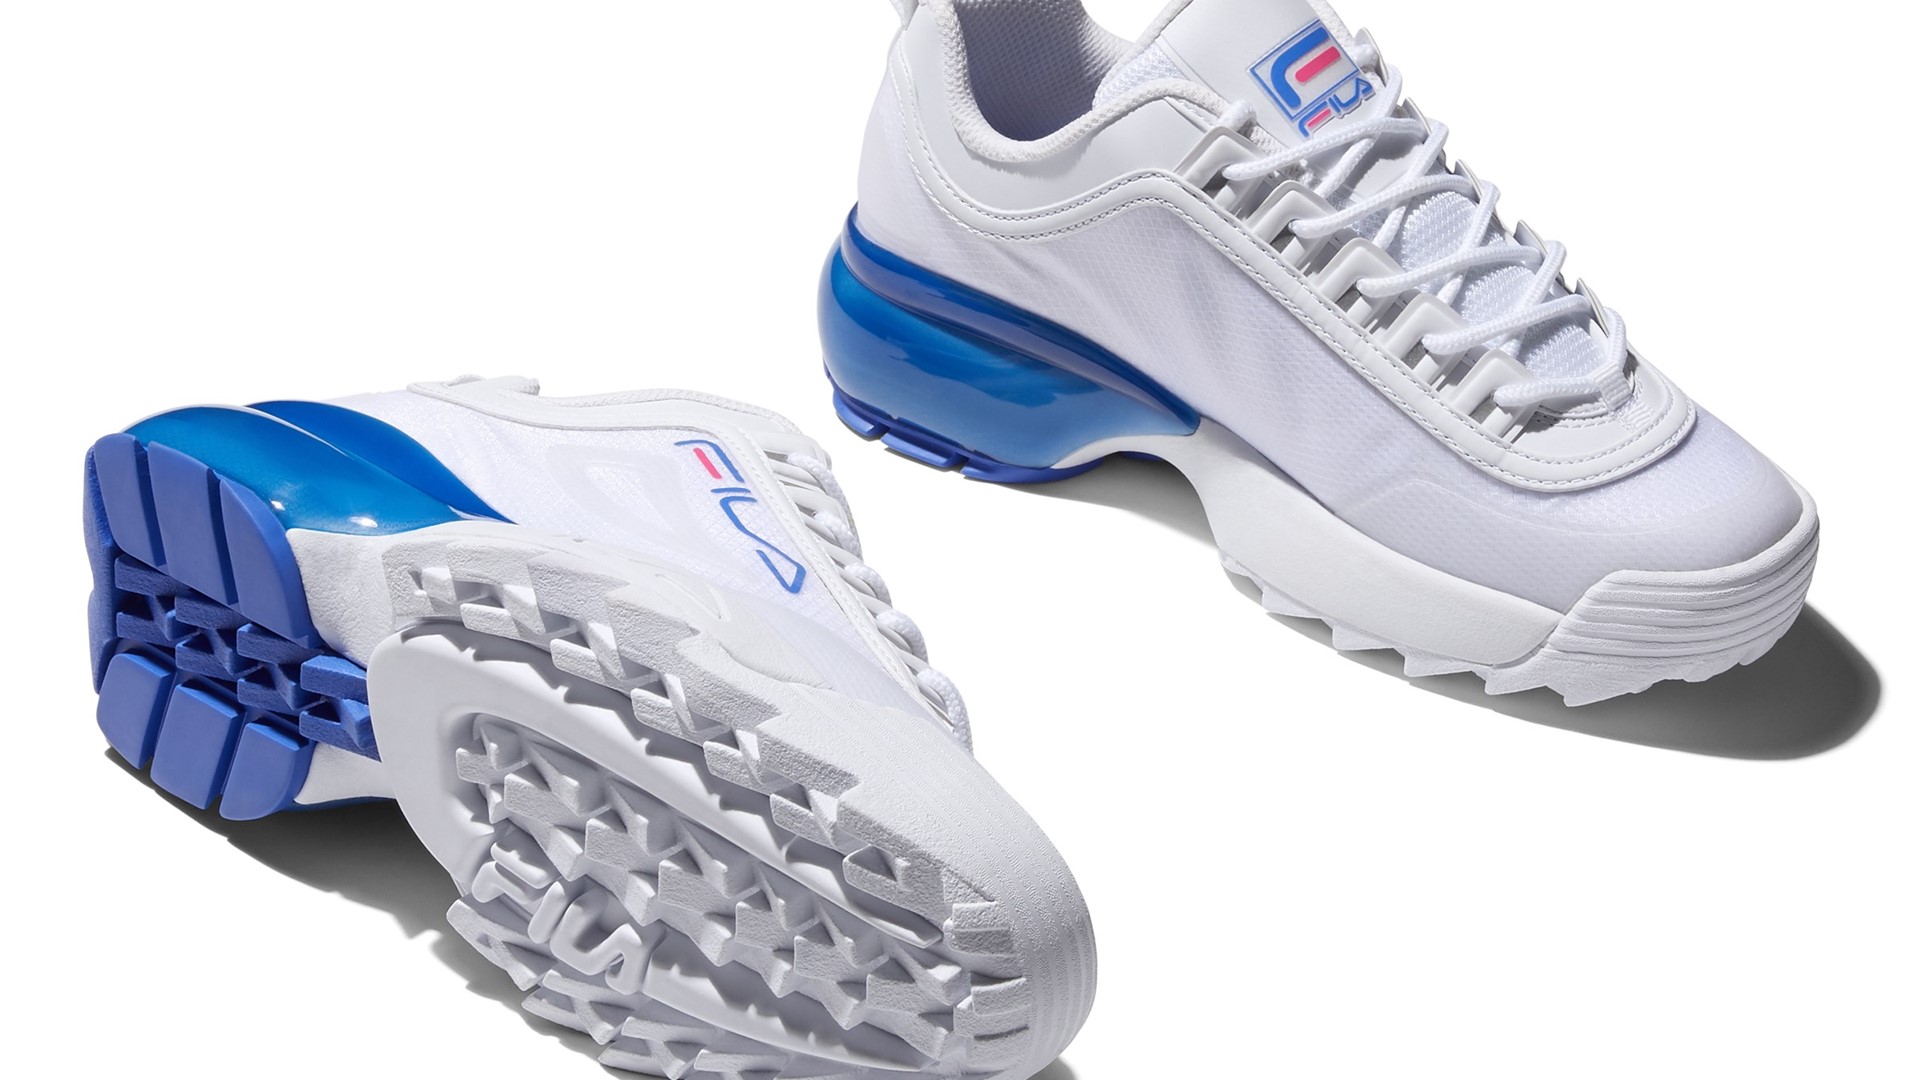 FILA Presents the Women’s Disruptor 2A in Three New Colorways